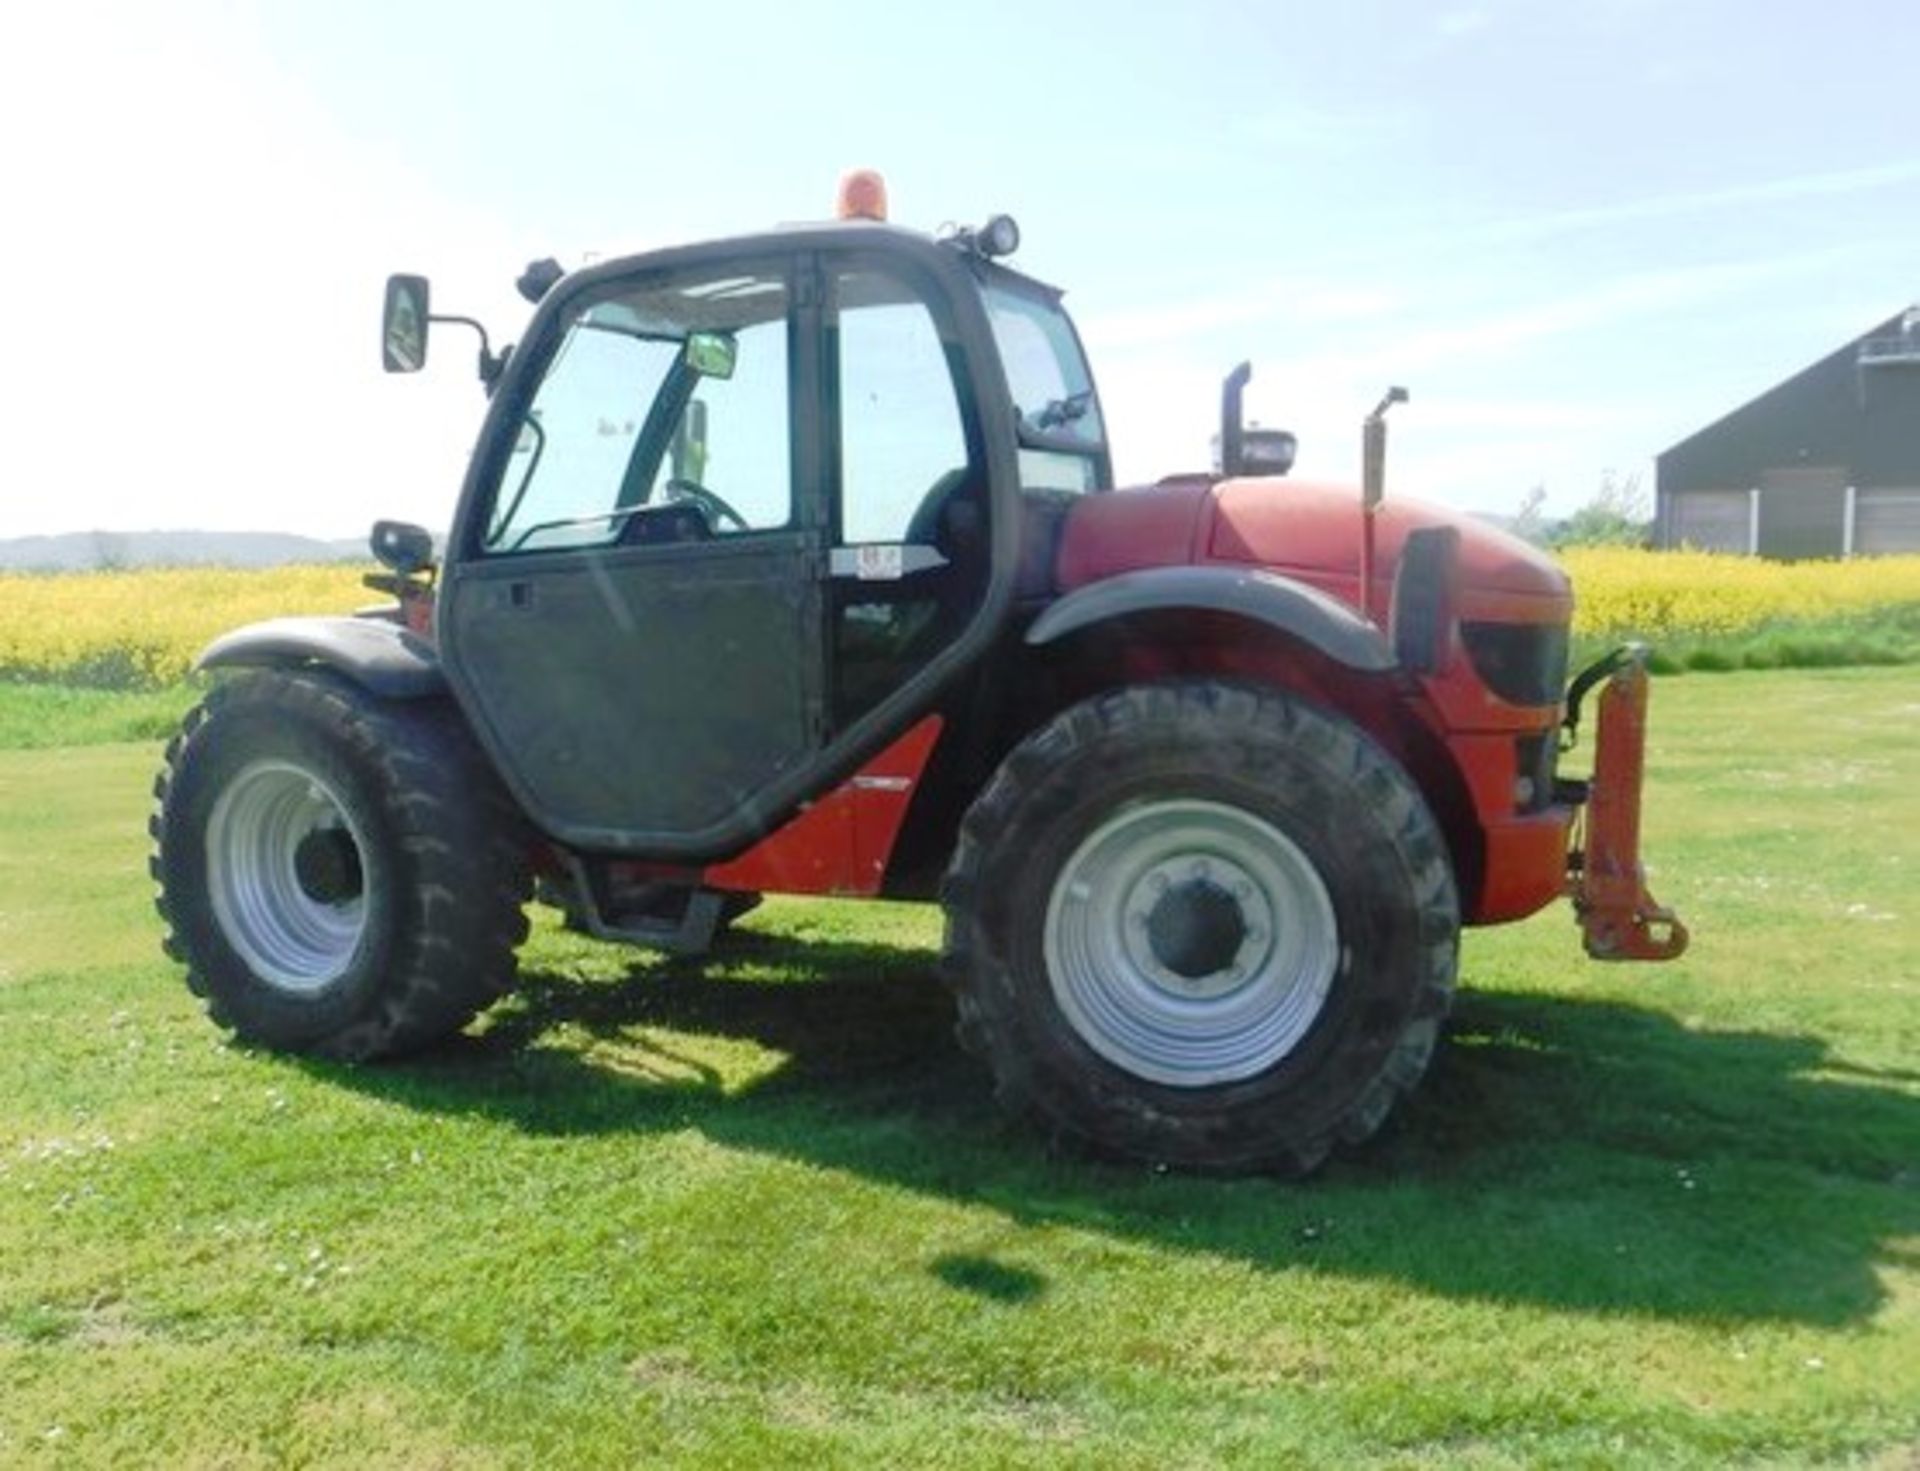 2011 MANITOU MLT627 TURBO. Air con. Solid filled tyres. Reg No SP60 ECW. 4798hrs (not verified) - Image 18 of 18